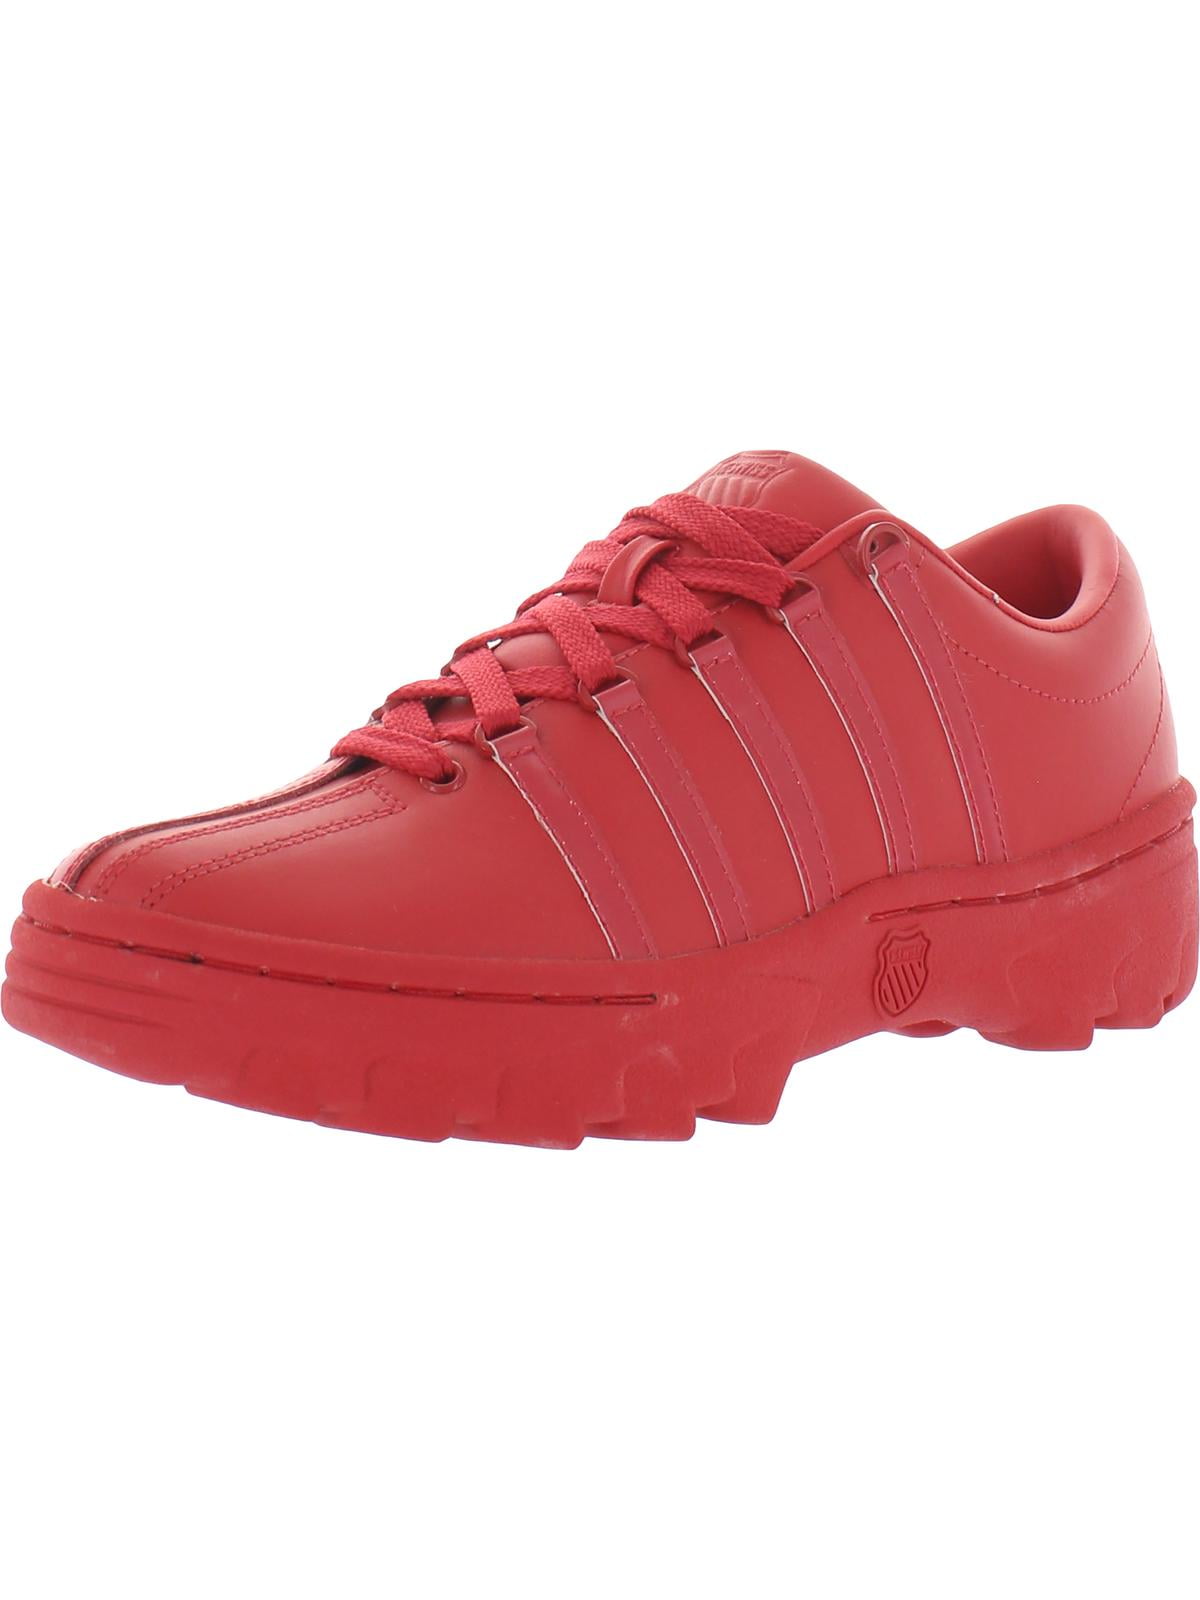 FI-2415-2 Red Patent Lace up Low Cut Leather Sneaker